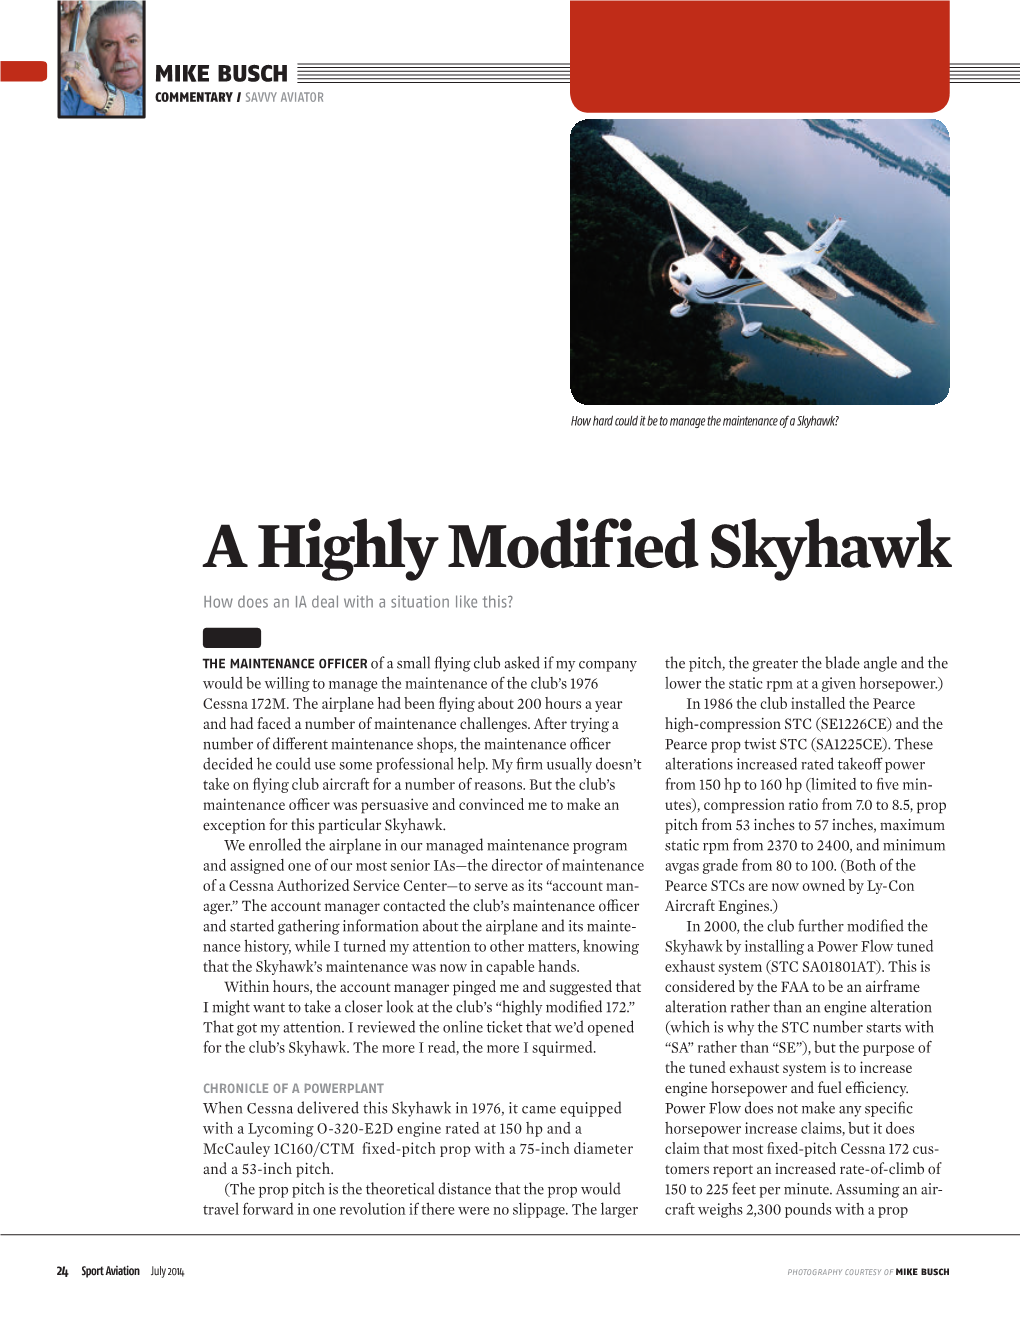 A Highly Modified Skyhawk How Does an IA Deal with a Situation Like This?